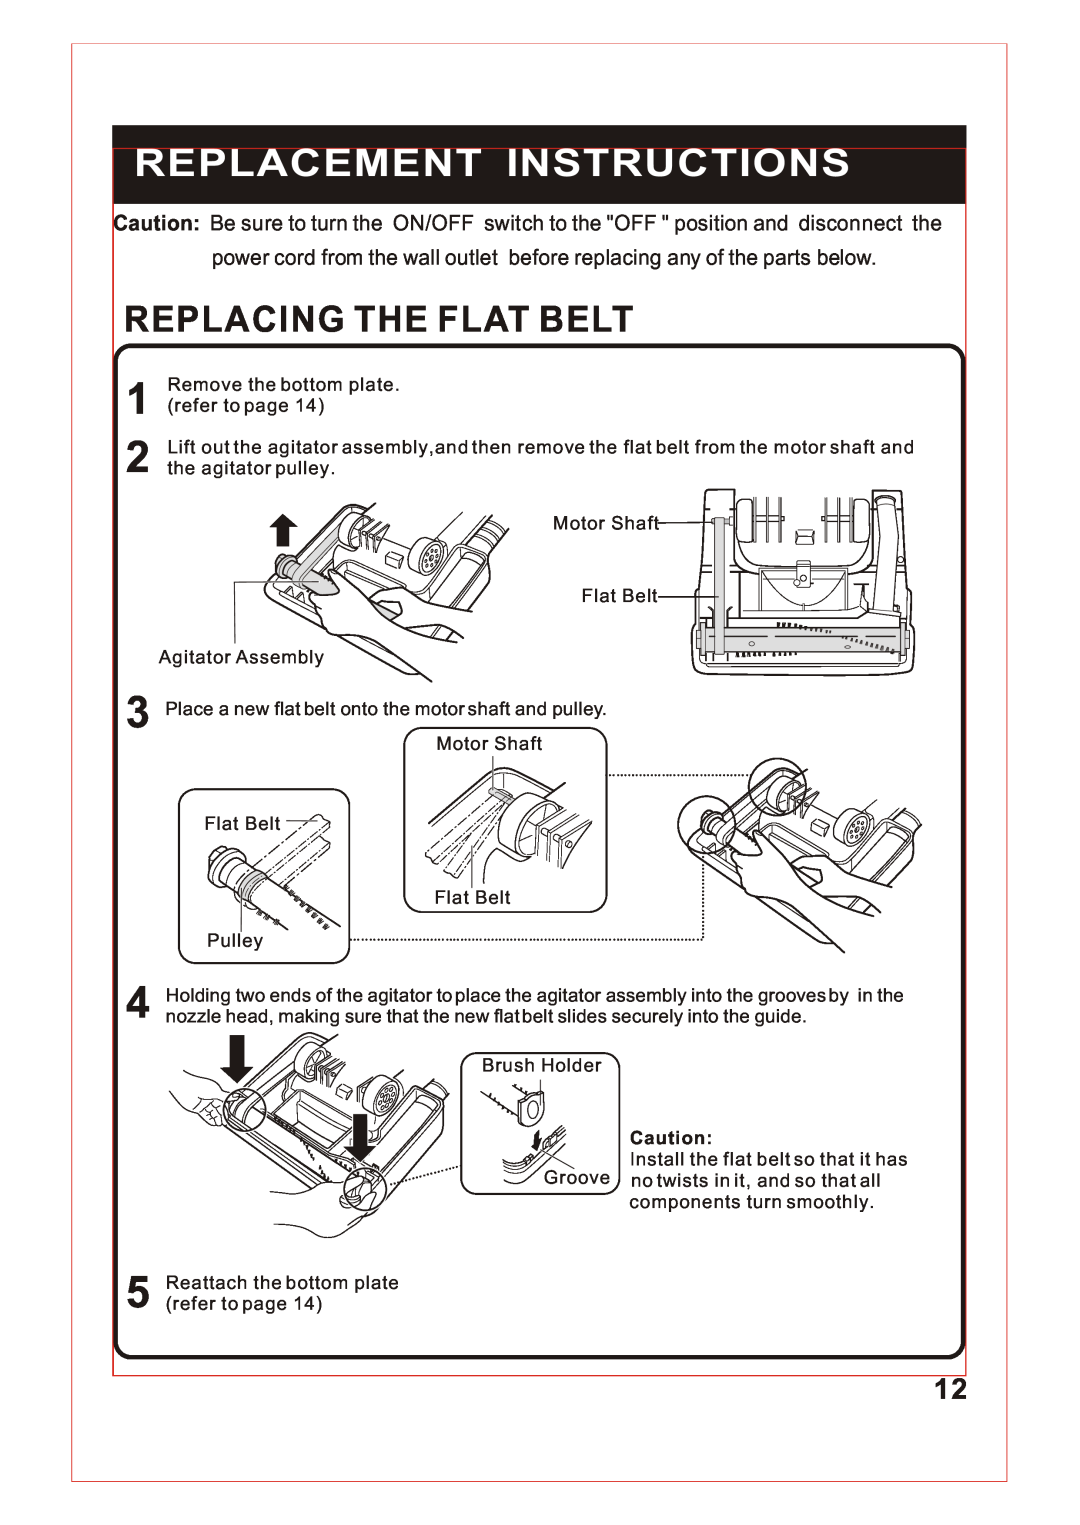 Sanyo SC-X90 instruction manual Replacement Instructions, Replacing The Flat Belt 